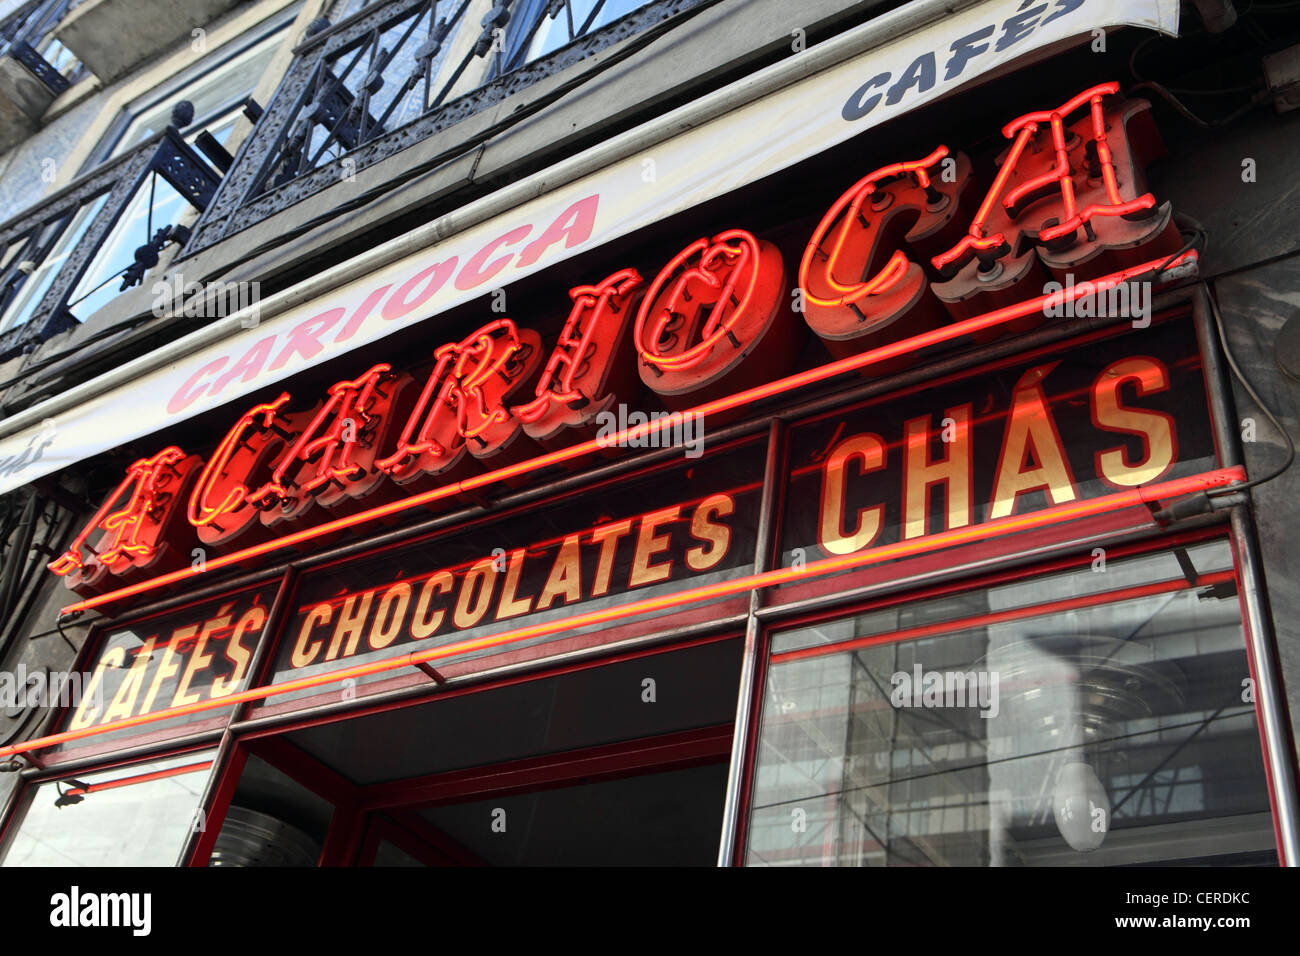 Red neon sign A Carioca, Cafe, Chocolate, Lisbon, Portugal. Stock Photo